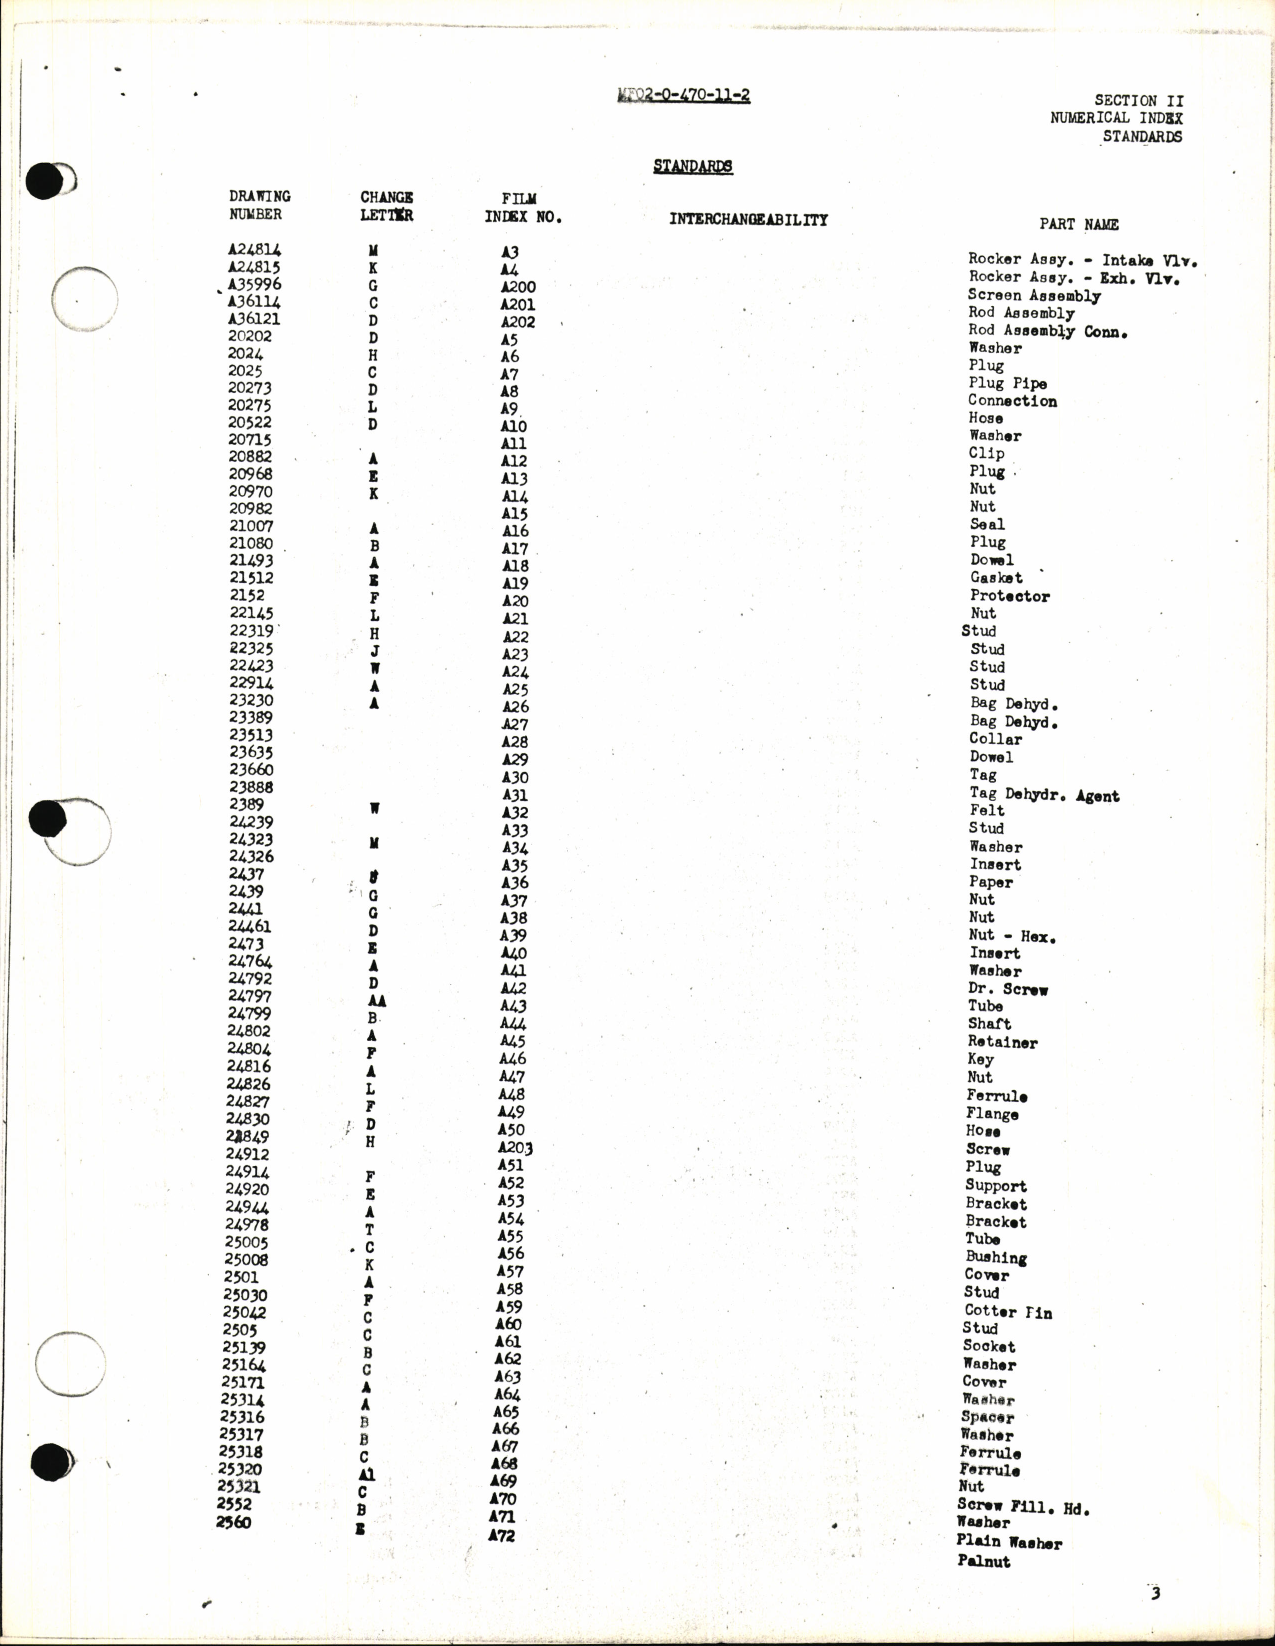 Sample page 5 from AirCorps Library document: Index of Drawings on Microfilm 0-470-11 Series Engines